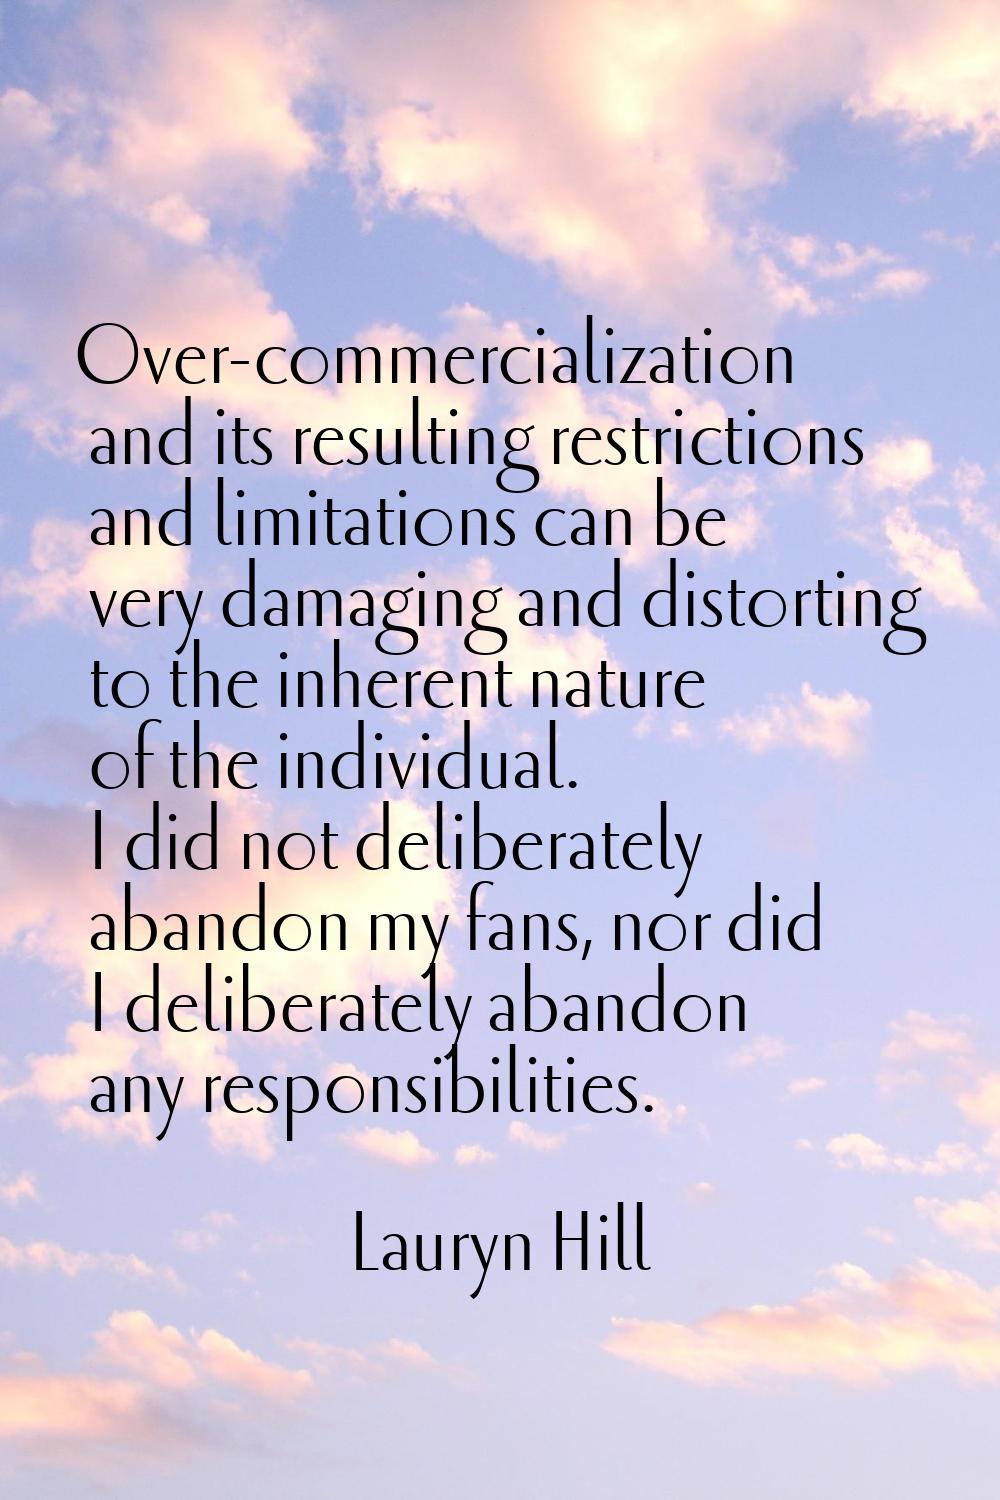 Over-commercialization and its resulting restrictions and limitations can be very damaging and dist